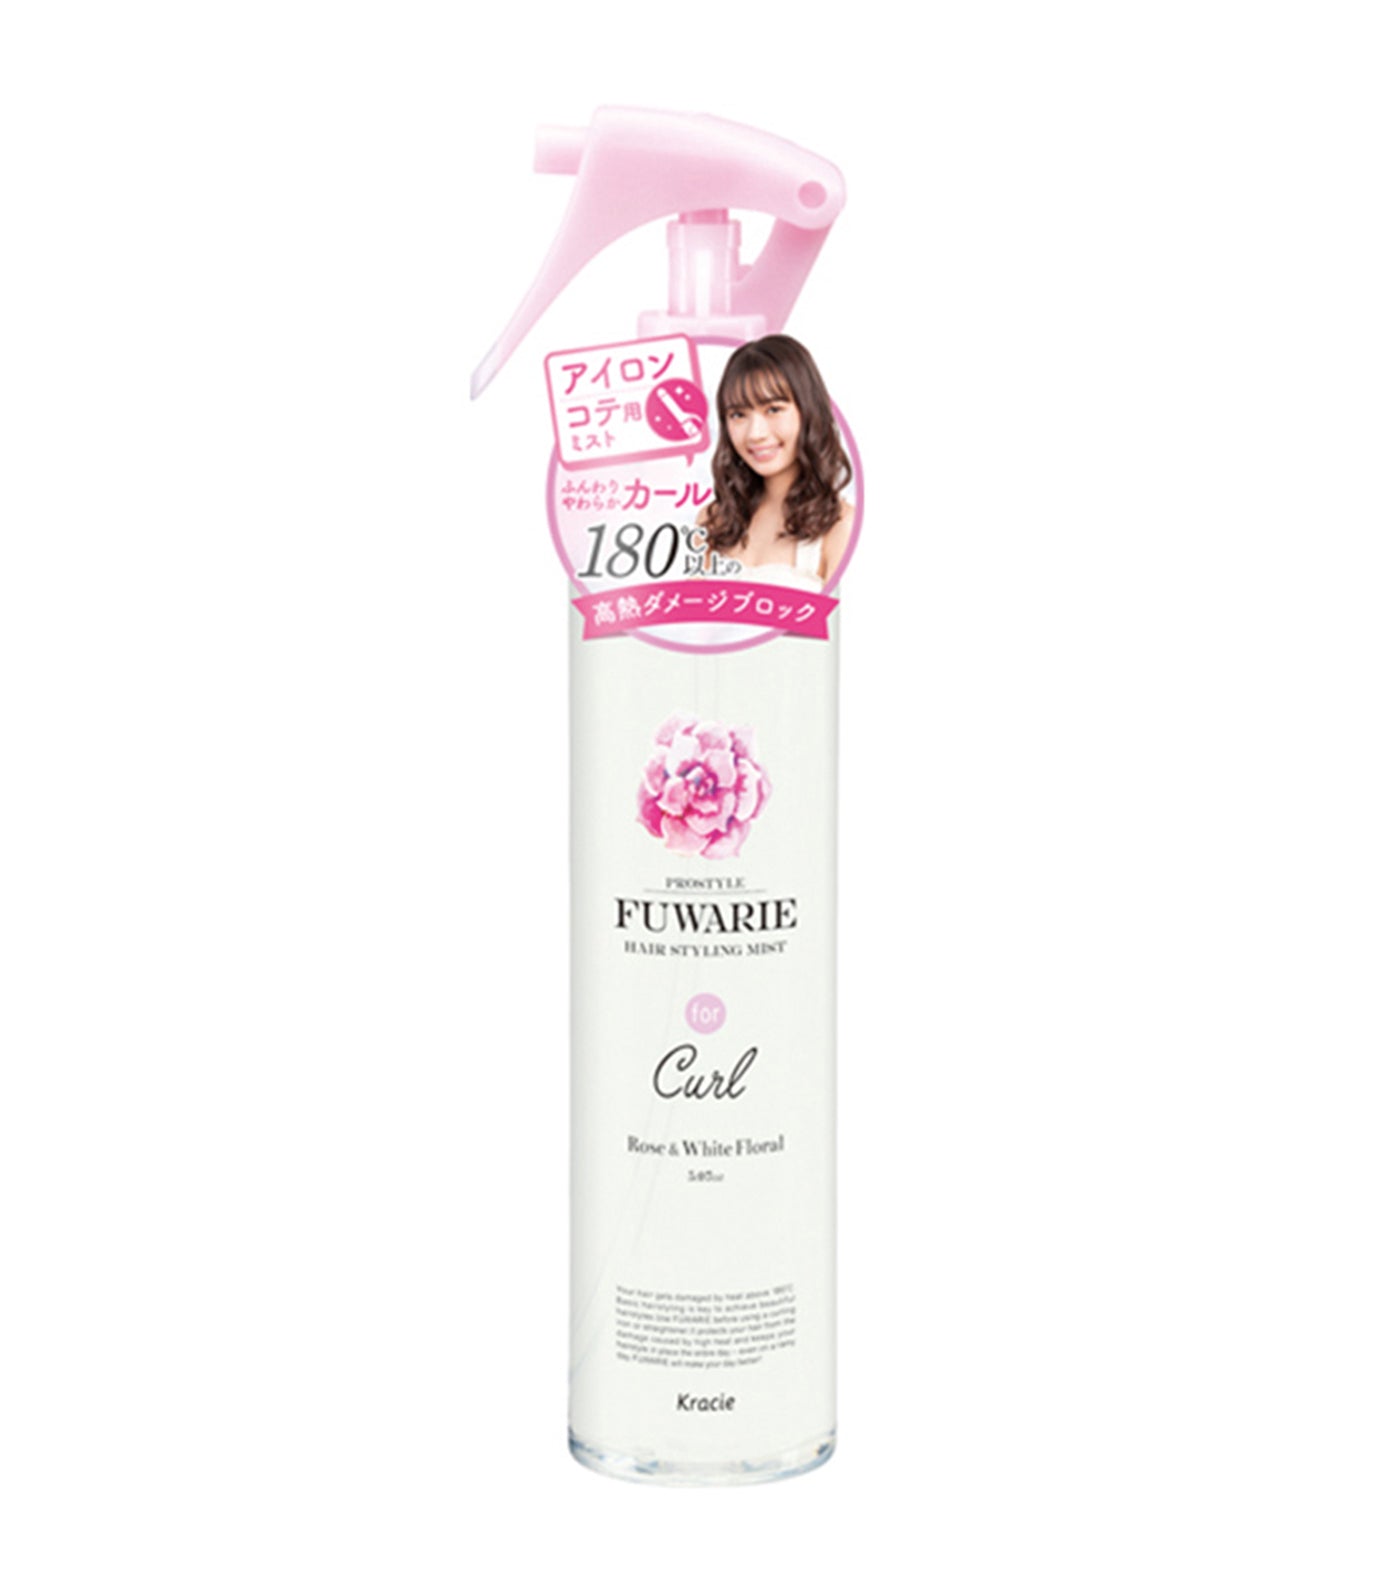 Prostyle Fuwarie Hair Styling Mist for Curl